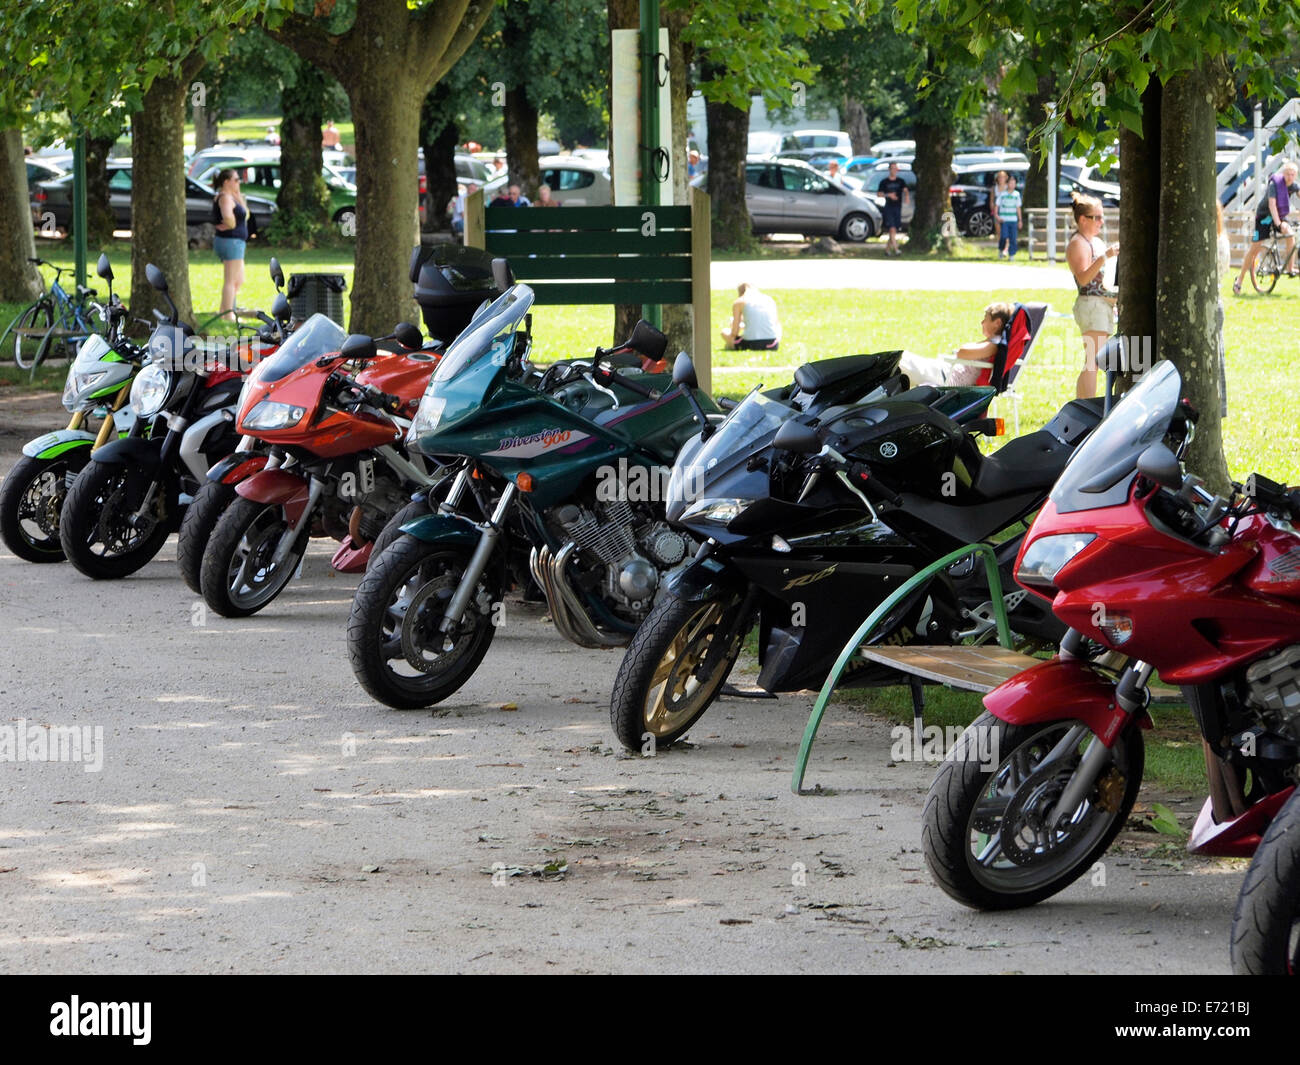 Line of parked motorcycles at Domaine the Chalain, Jura, France Stock Photo